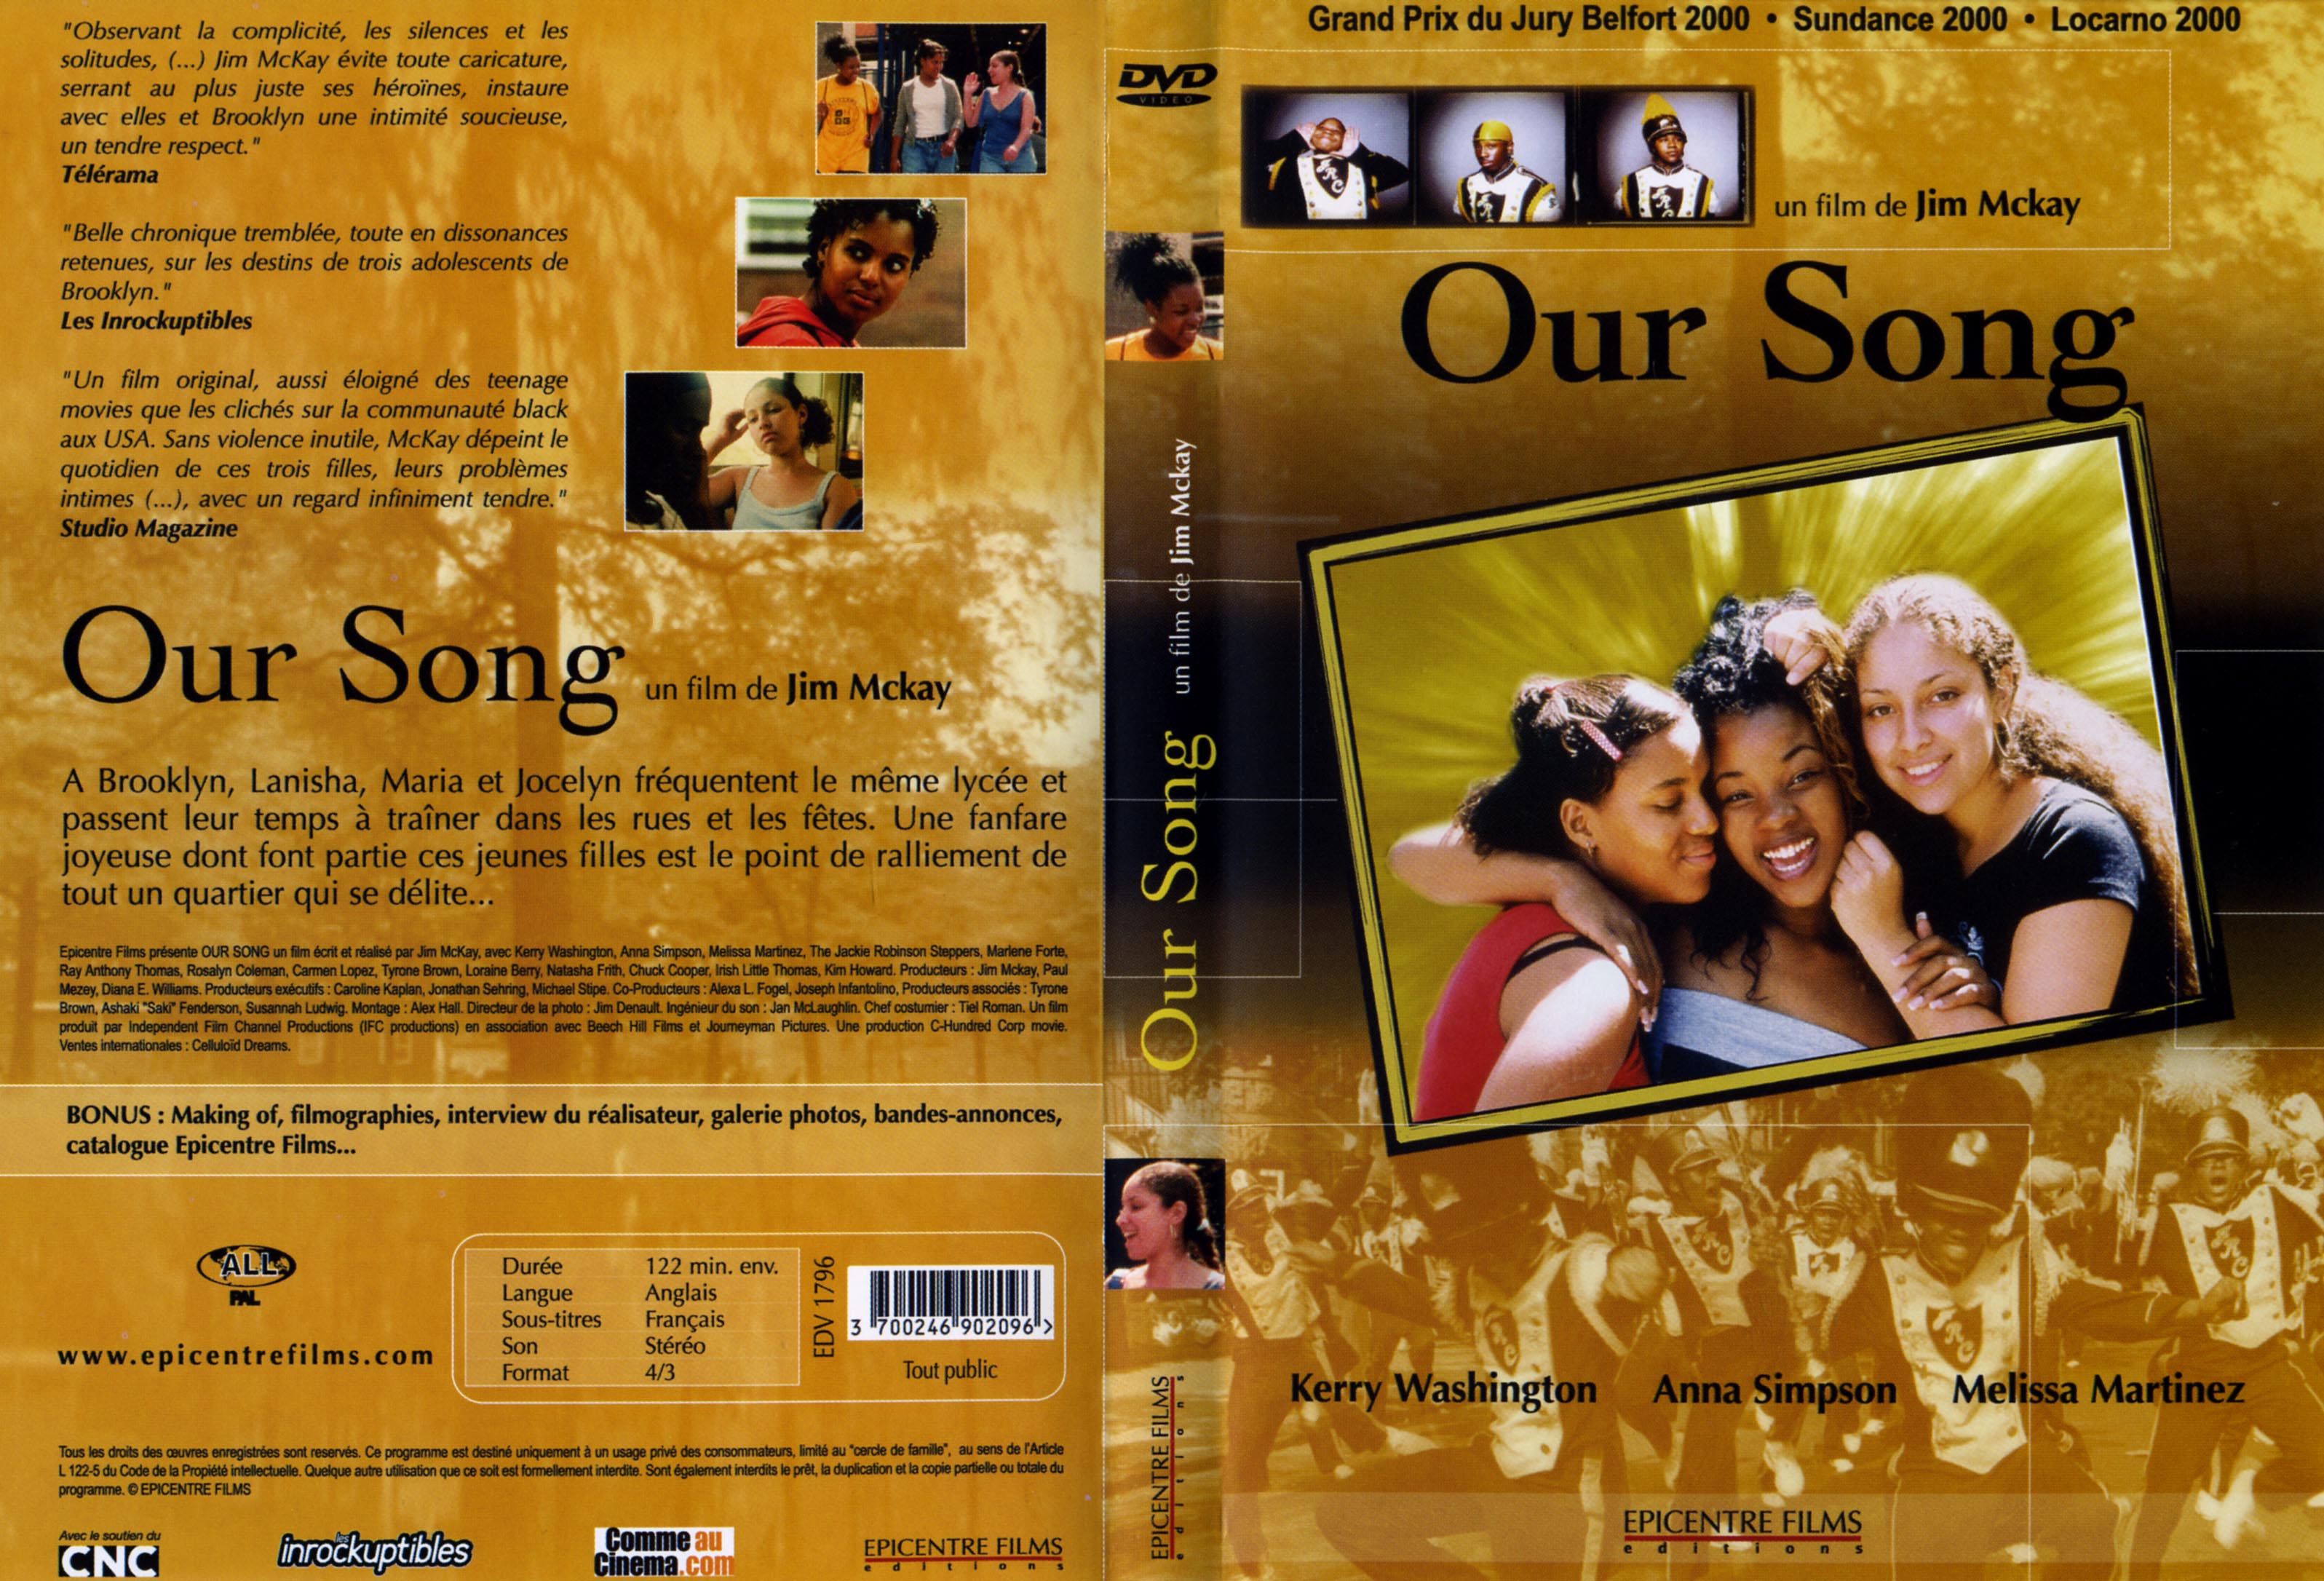 Jaquette DVD Our Song